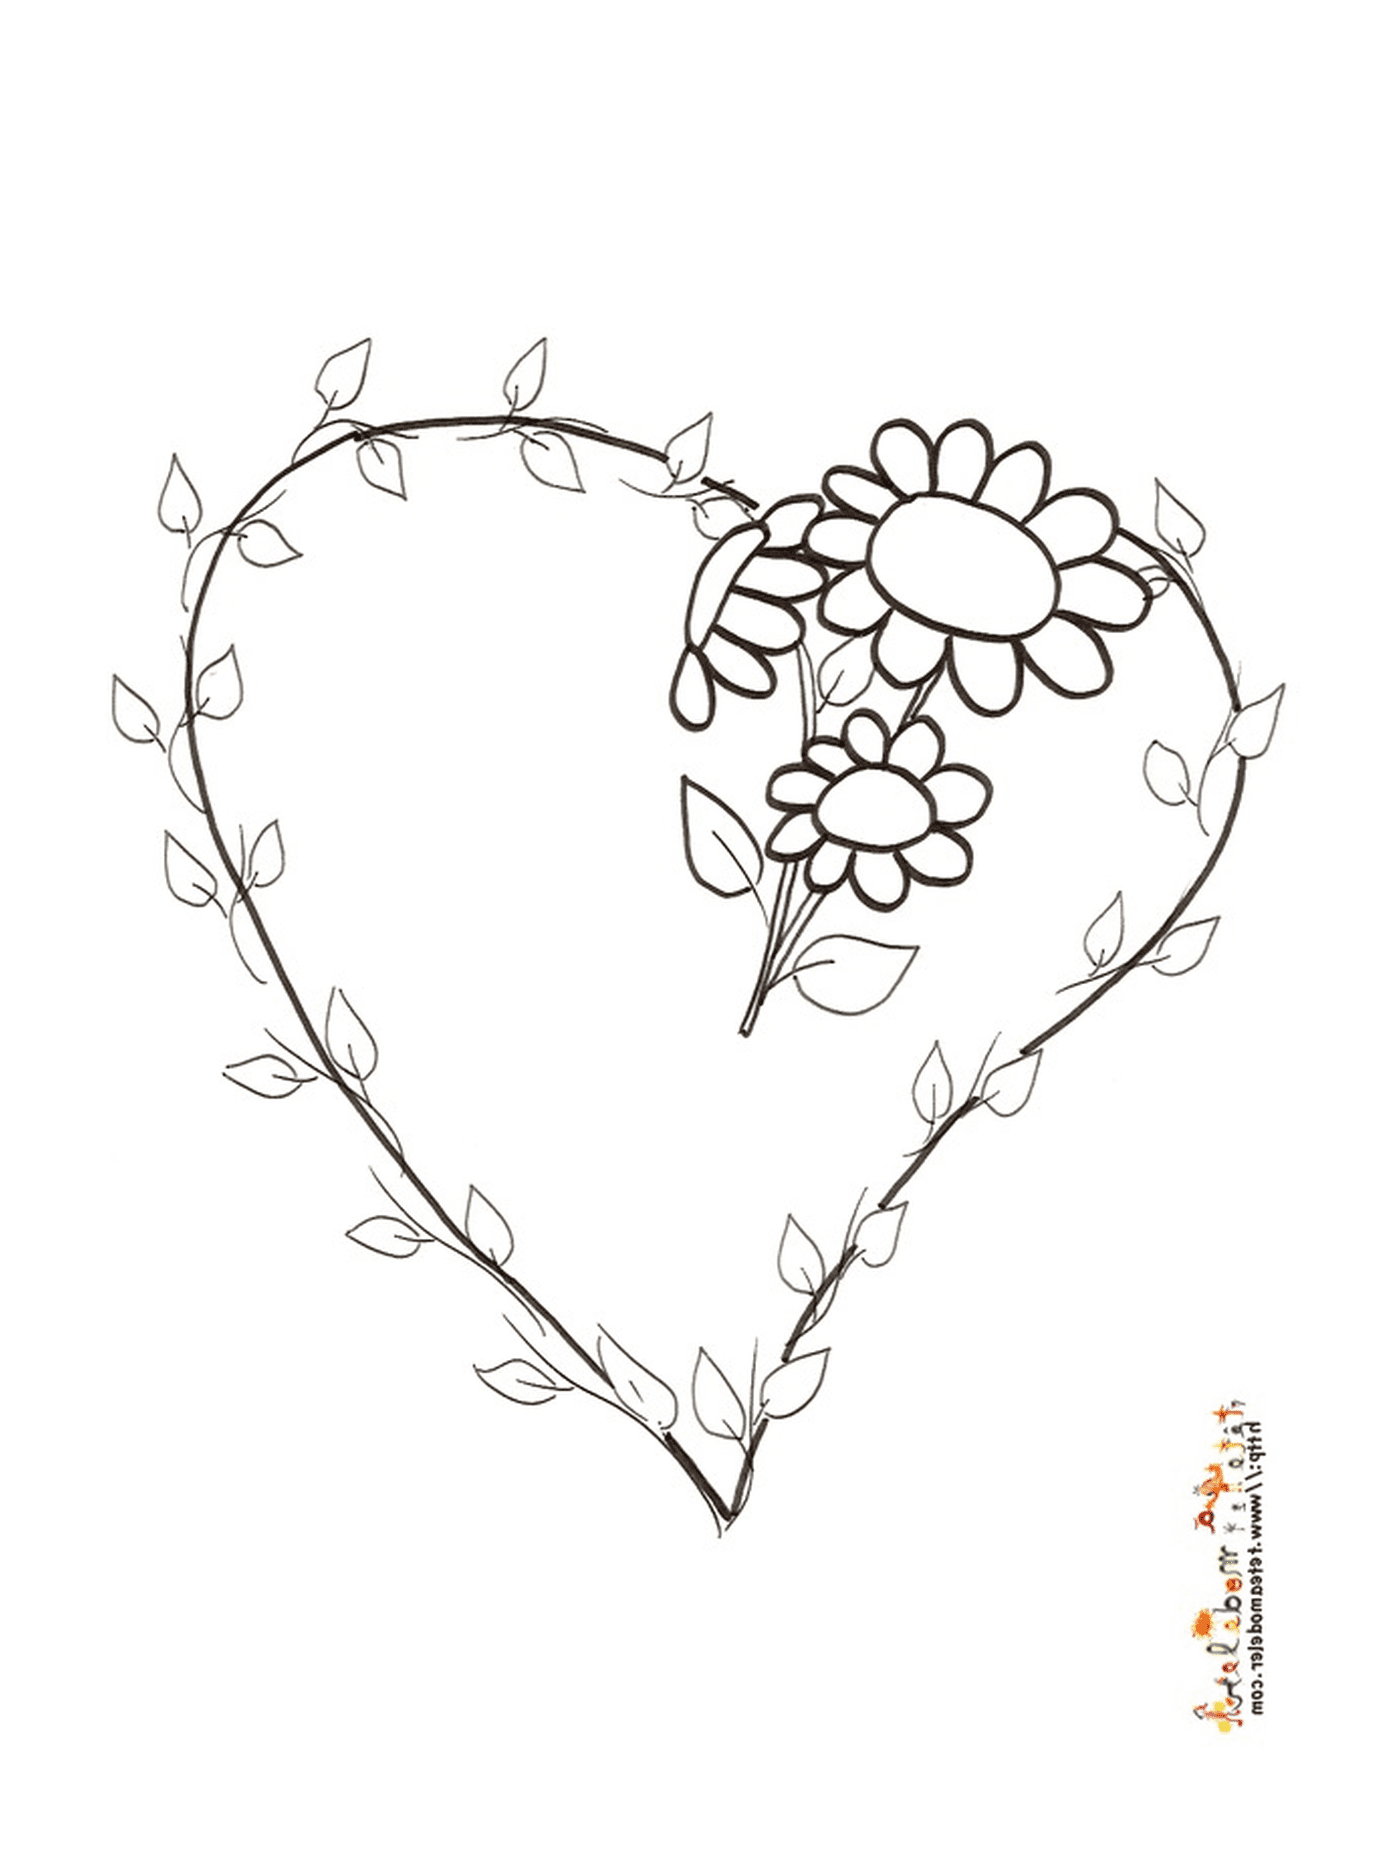  Heart with flowers and leaves 